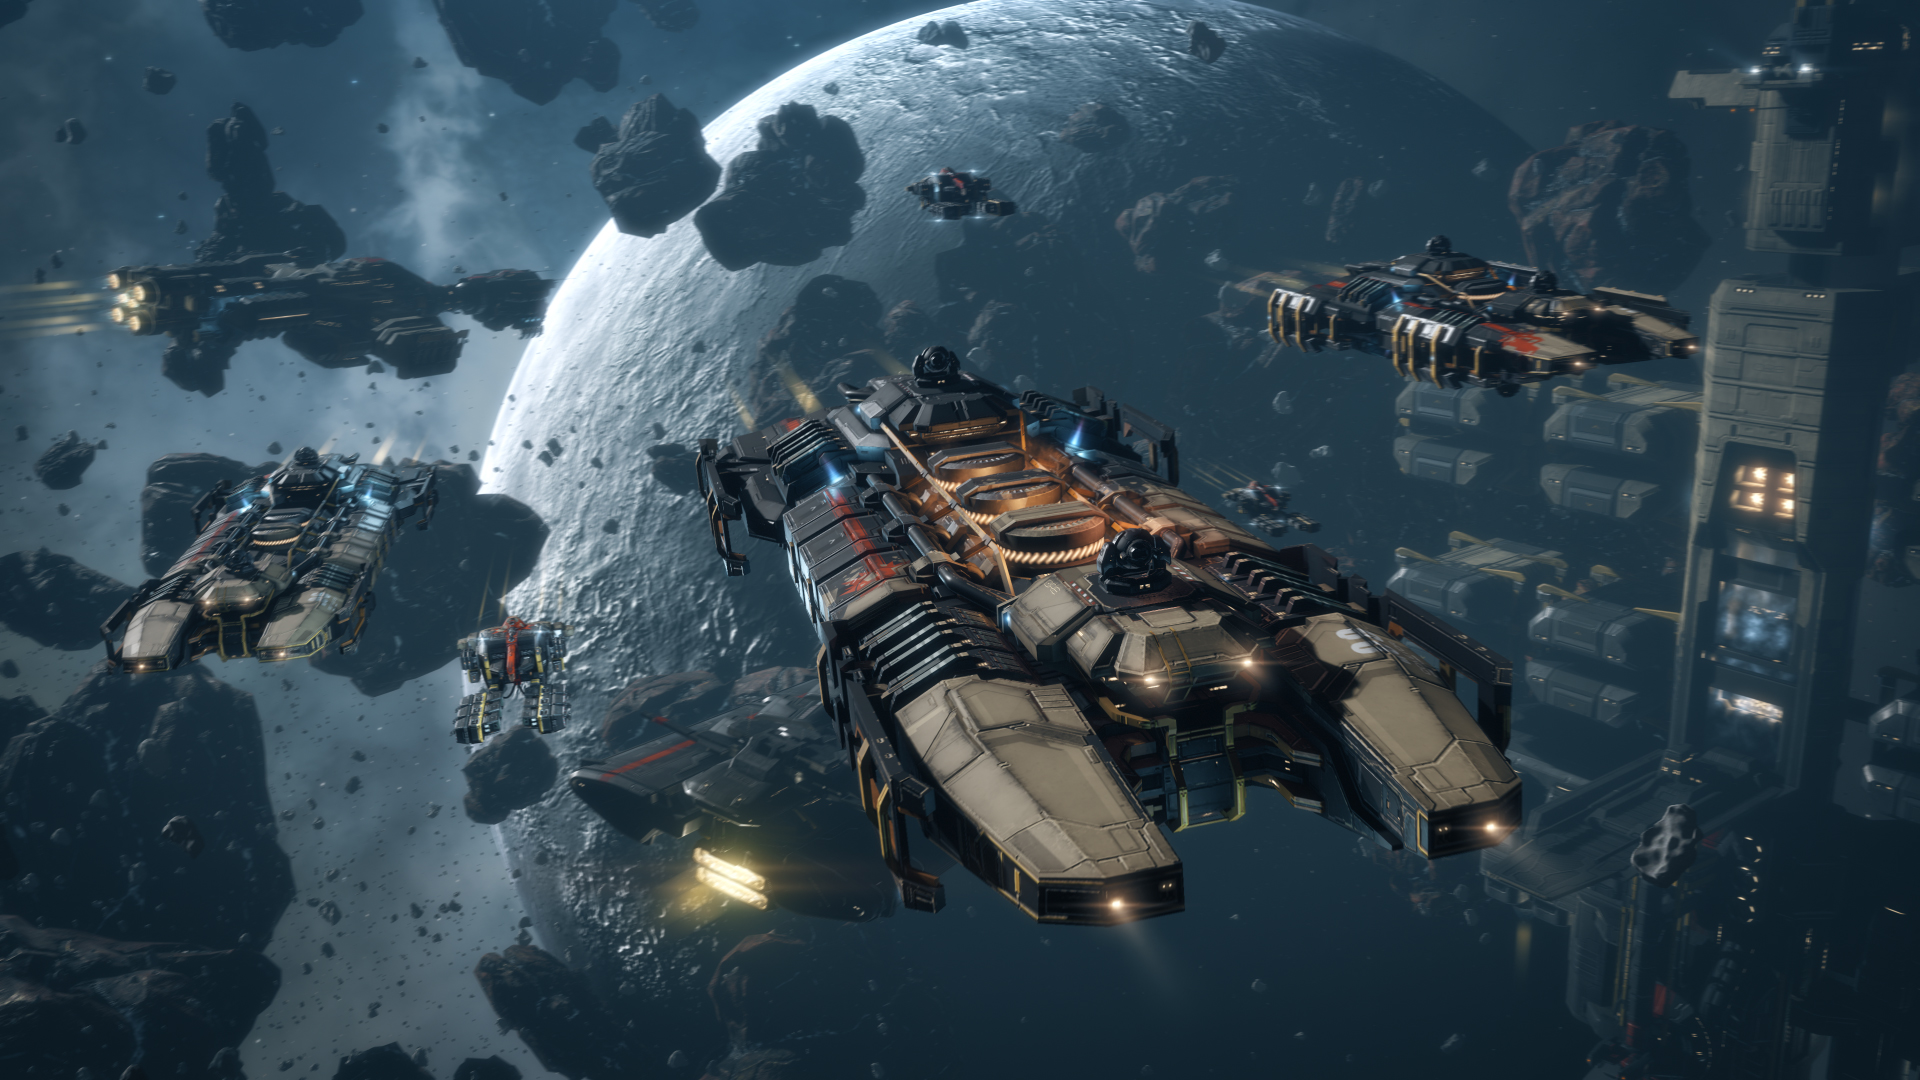 CCP Games launches Microsoft Excel add-in for EVE Online, transforming  gameplay with enhanced data analysis and visualization 👾 COSMOCOVER - The  best PR agency for video games in Europe!